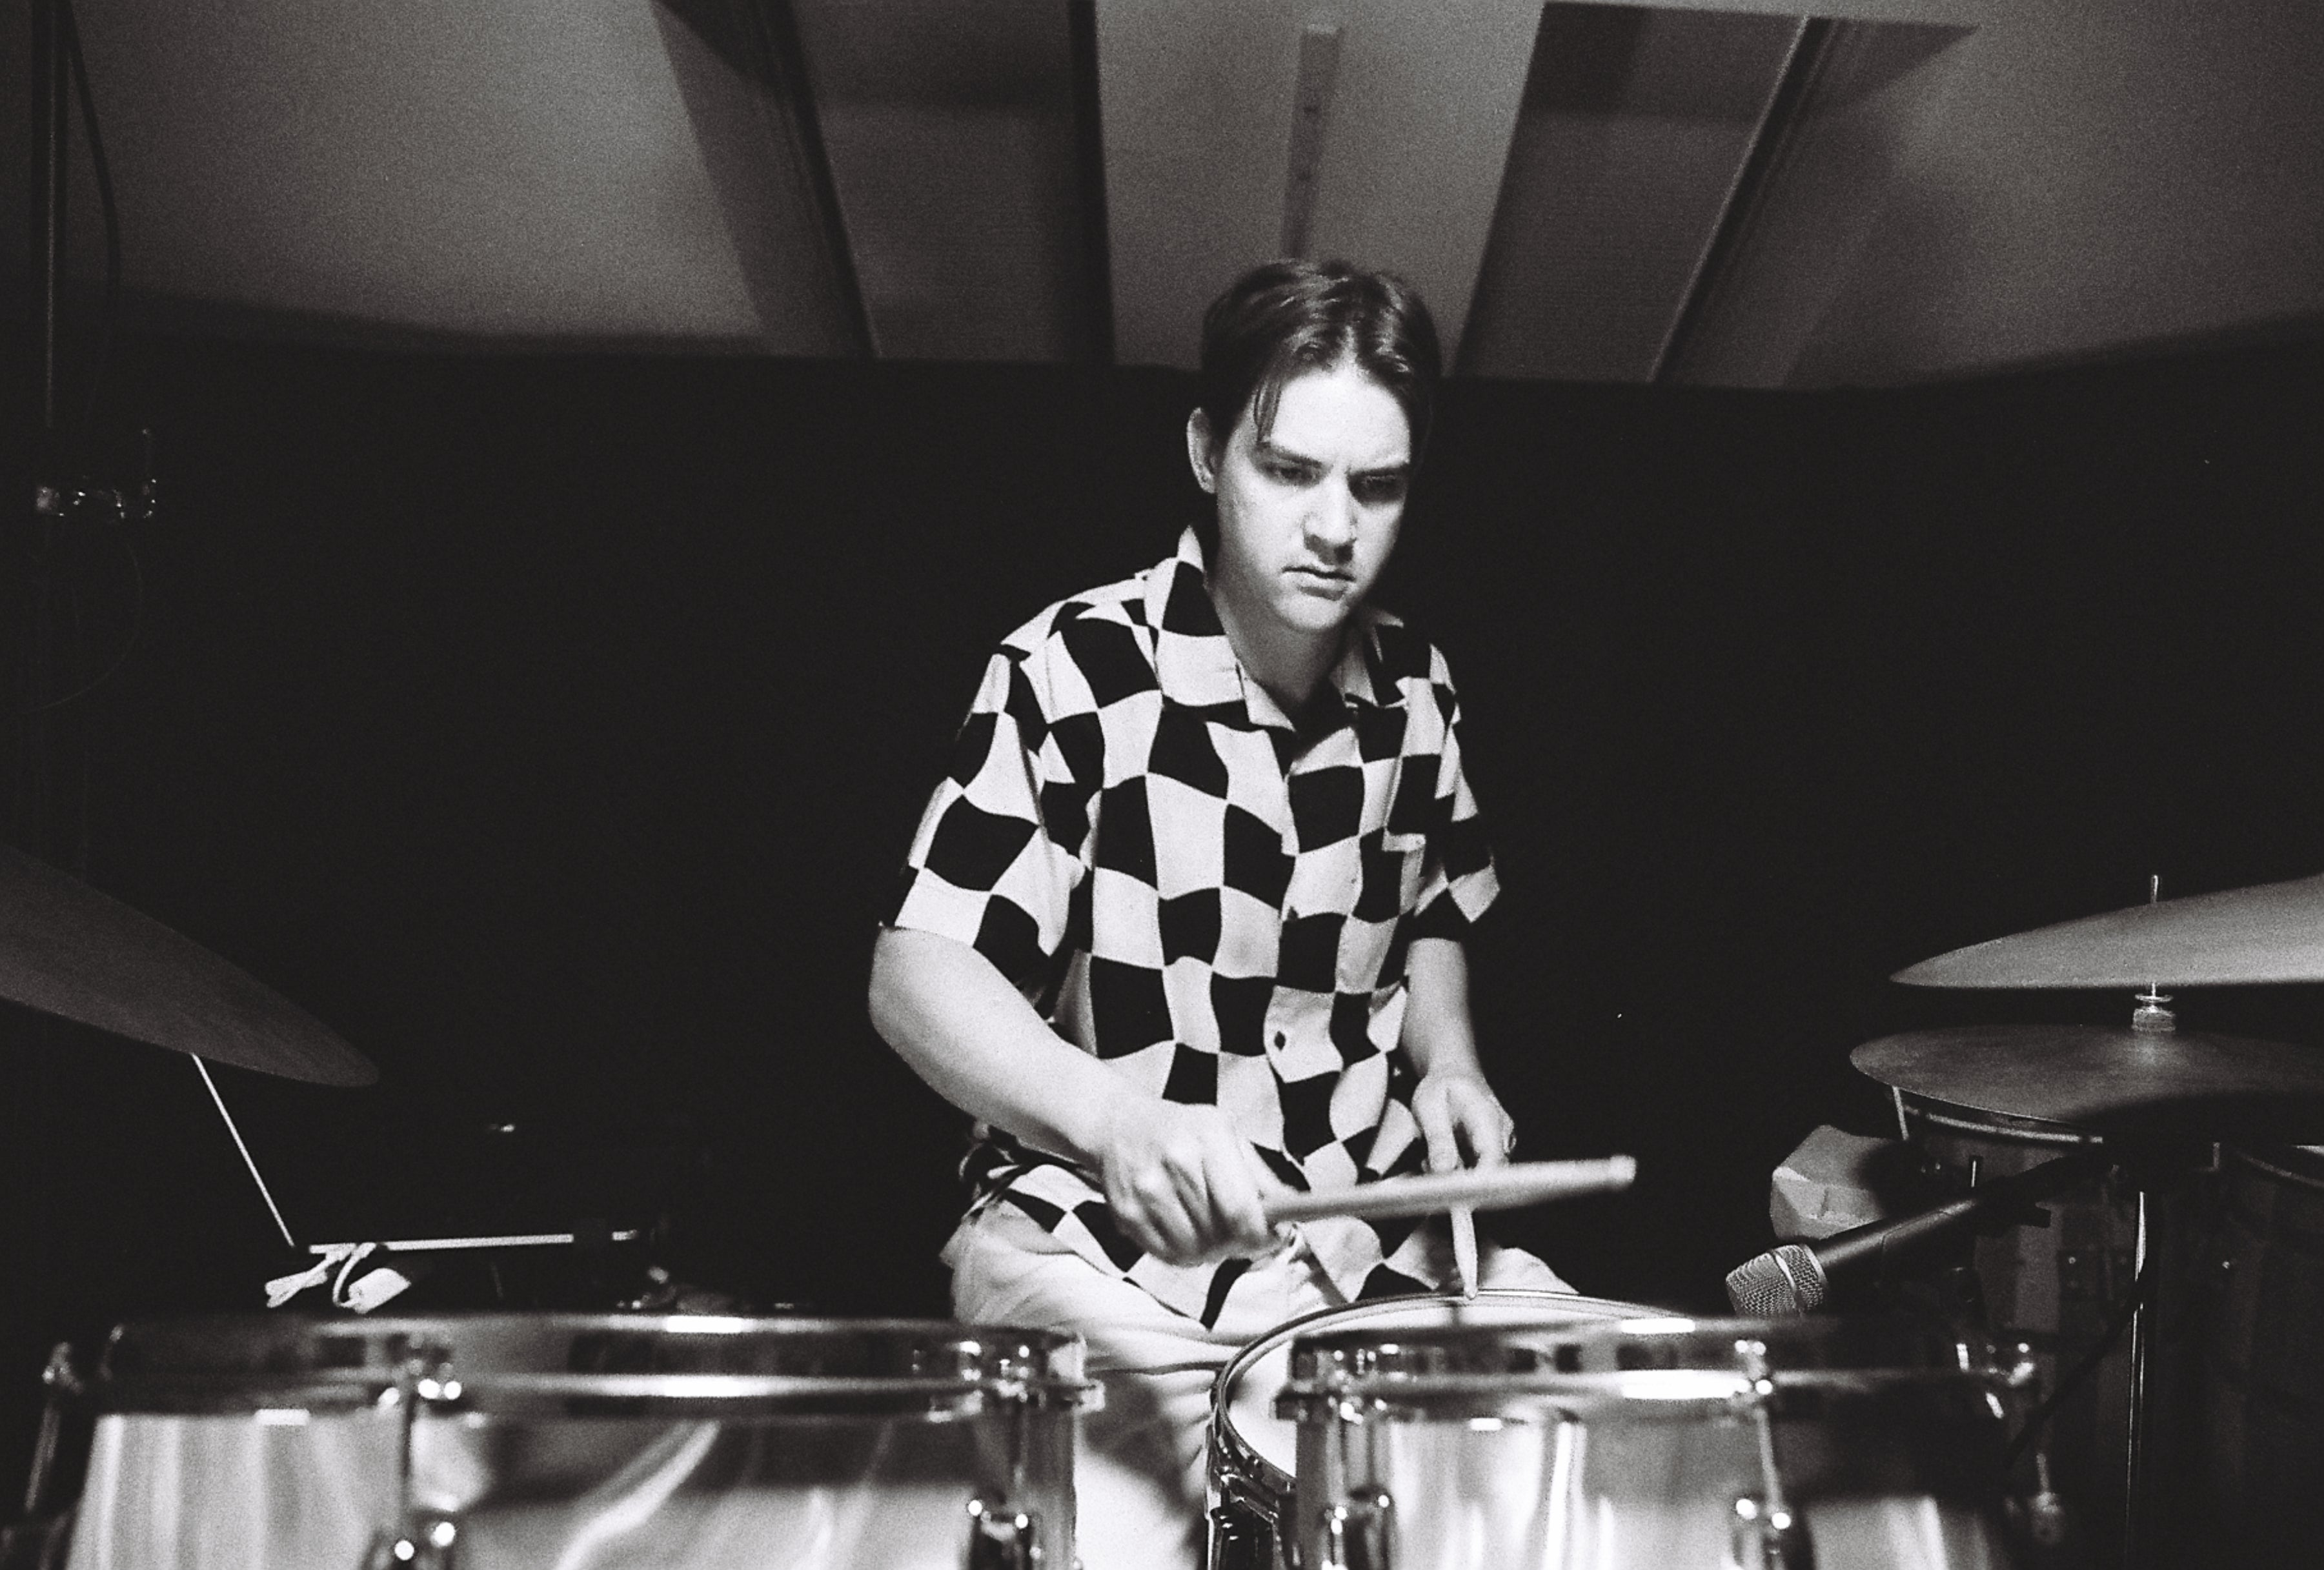 A man in a checkered shirt plays drums.